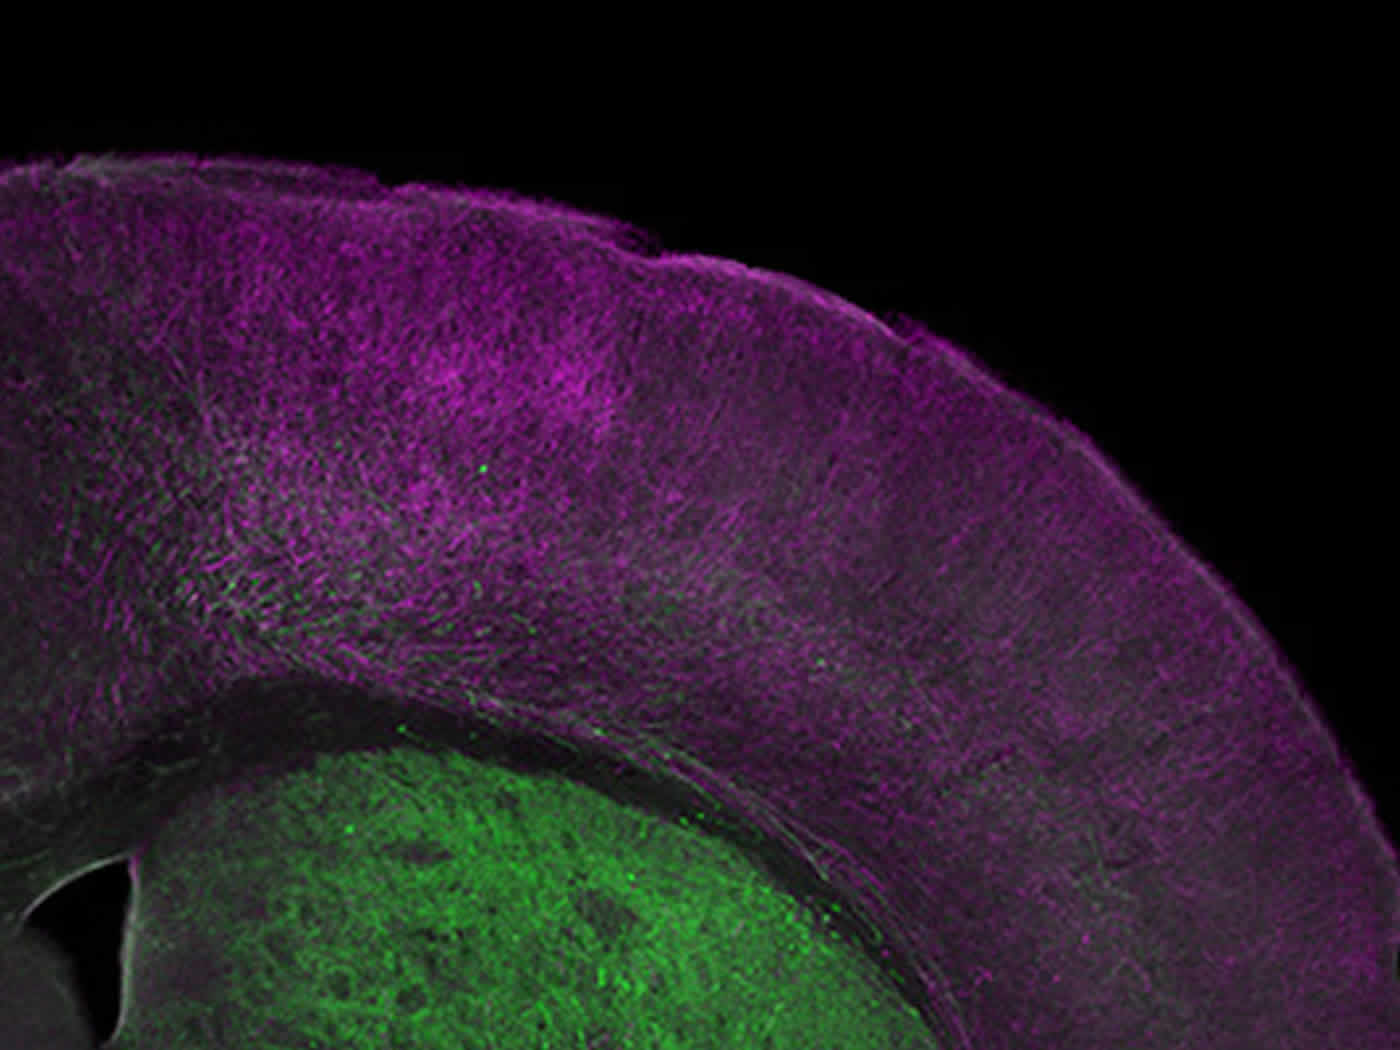 This image shows a microscopic view of the frontal cortex of a mouse.